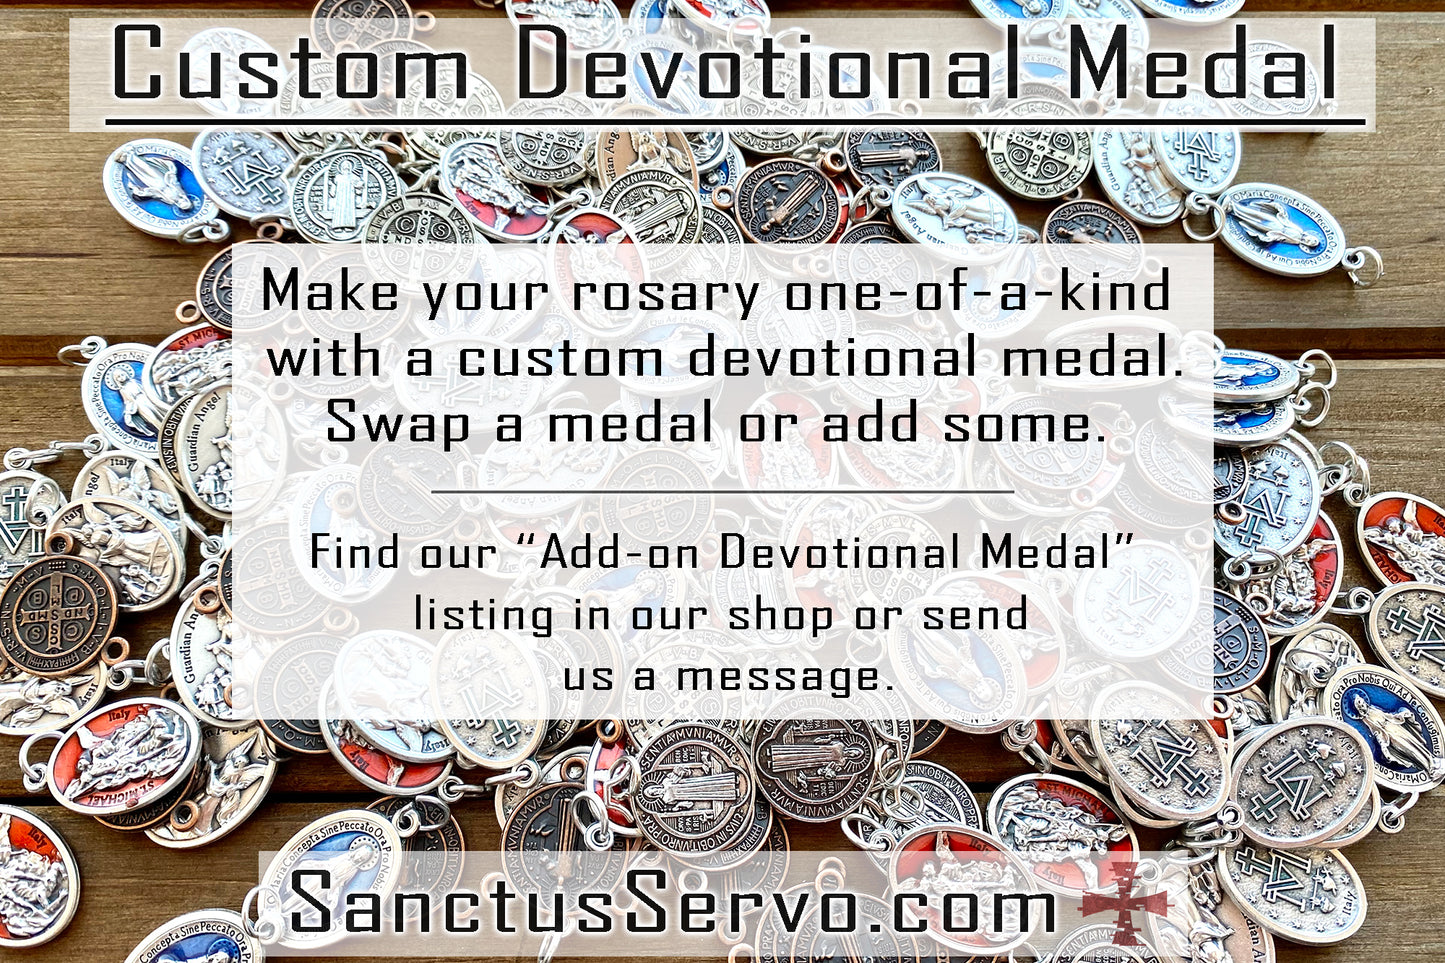 Devotional Medal picture showing options that are available for purchase to be added to any rosary purchased from SanctusServo.com.